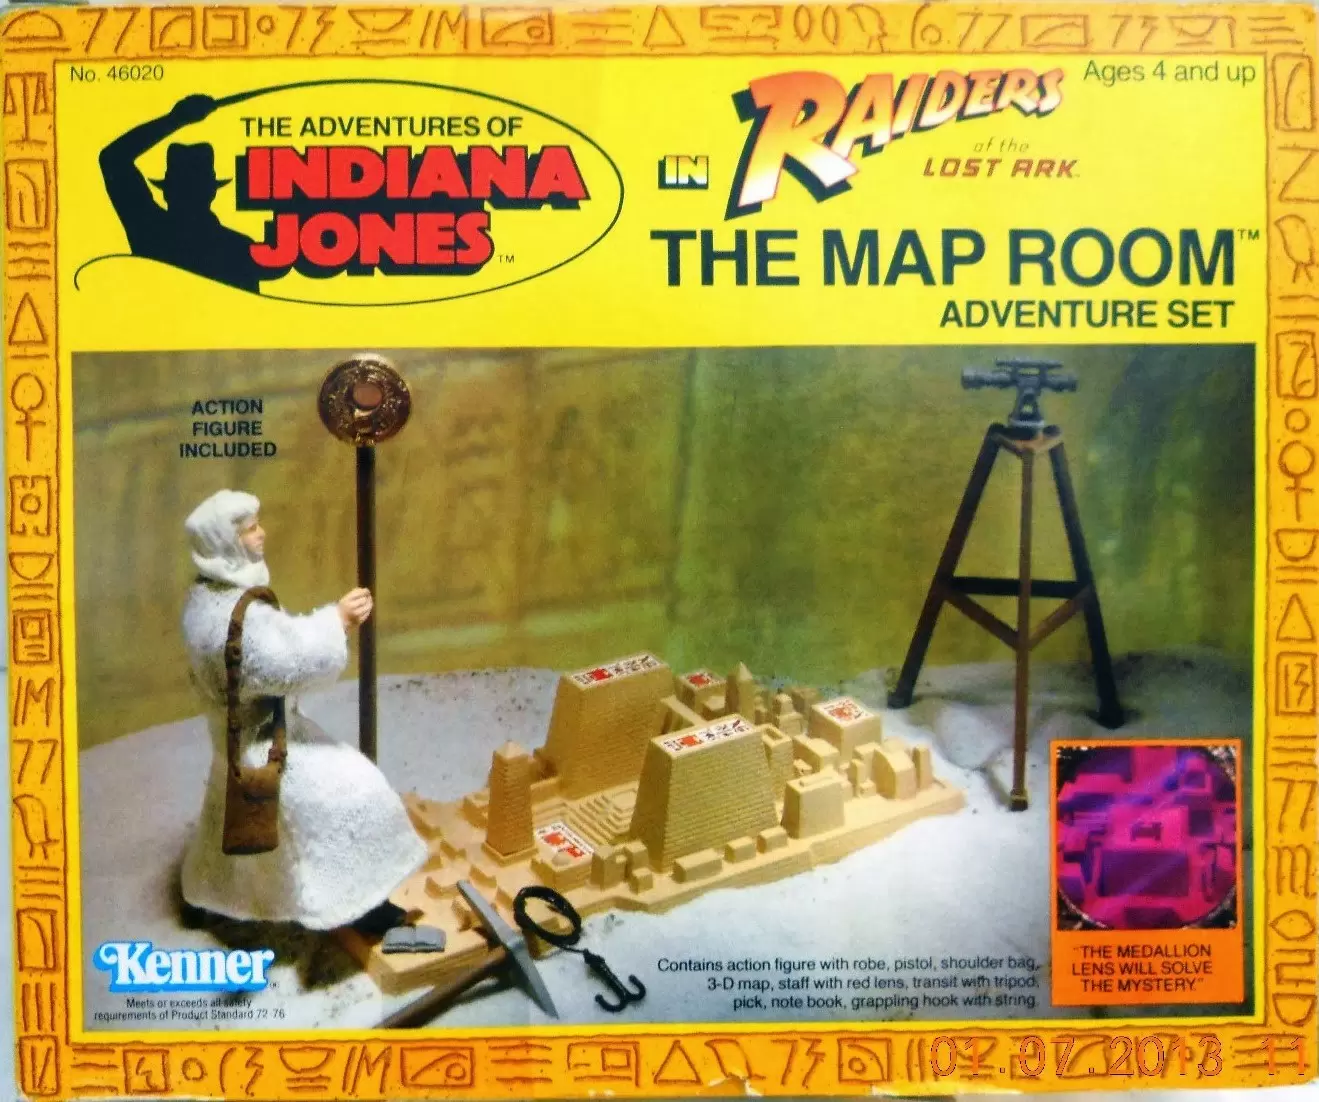 Indiana Jones - Kenner - Raiders of the Lost Ark - The Map Room